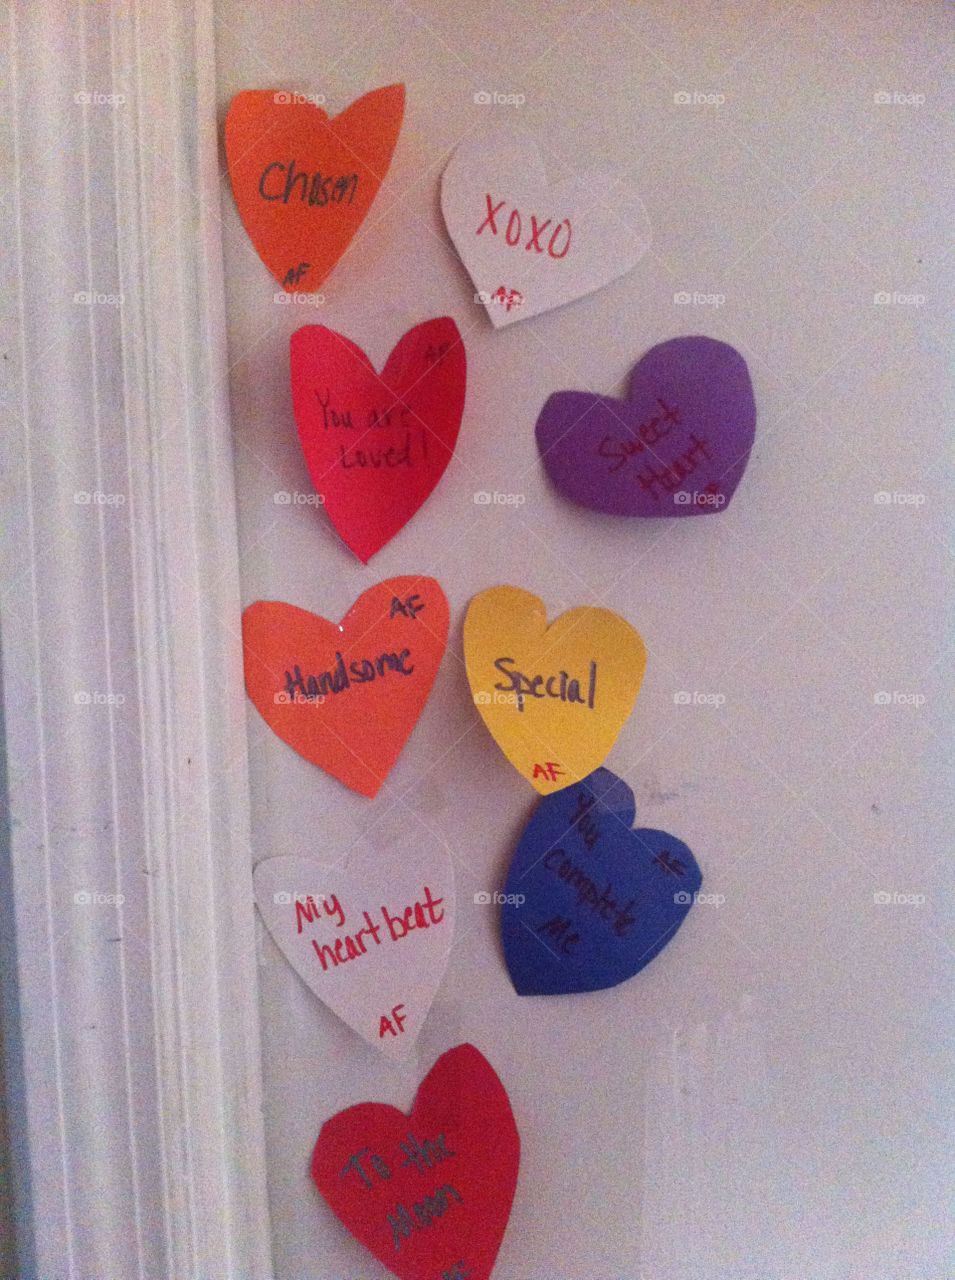 Valentines day notes . Valentines left on a door